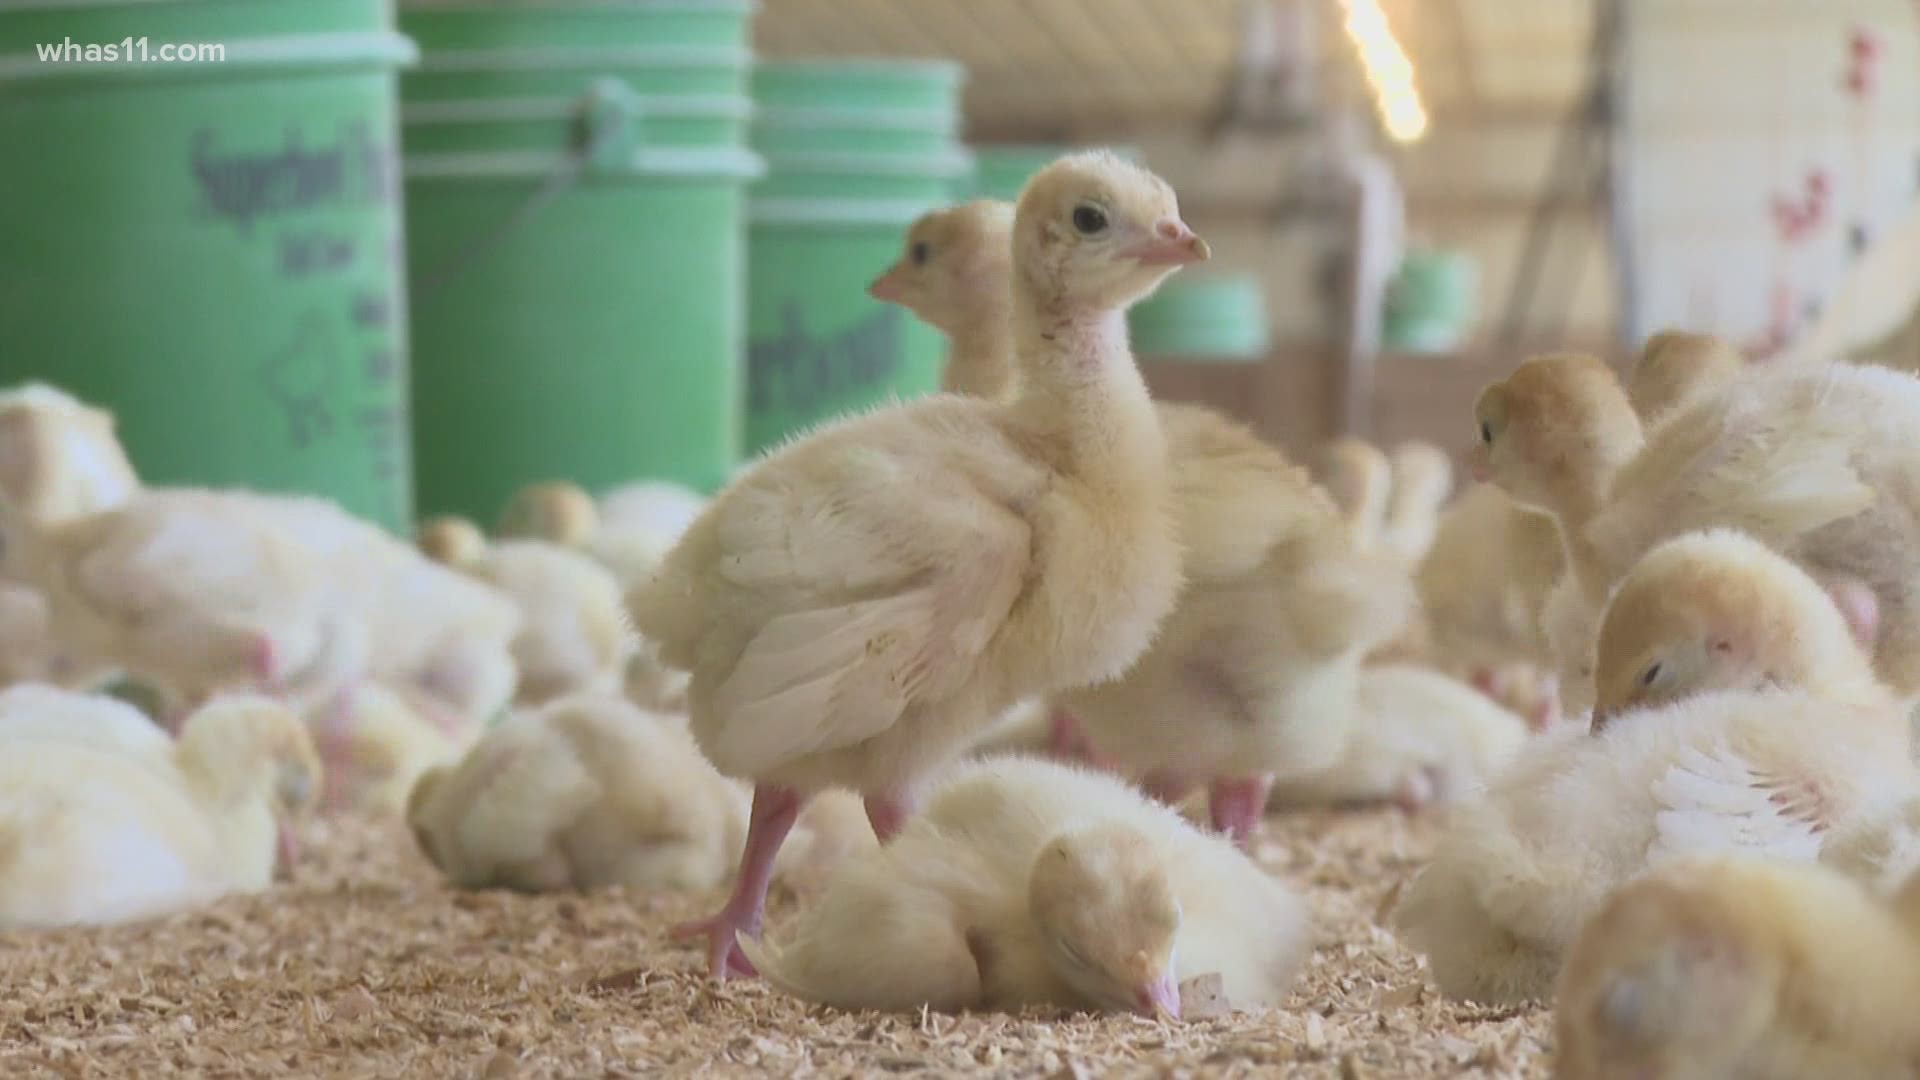 An Indiana farmer uses Louisville Slugger wood shavings as bedding for his days-old turkeys.